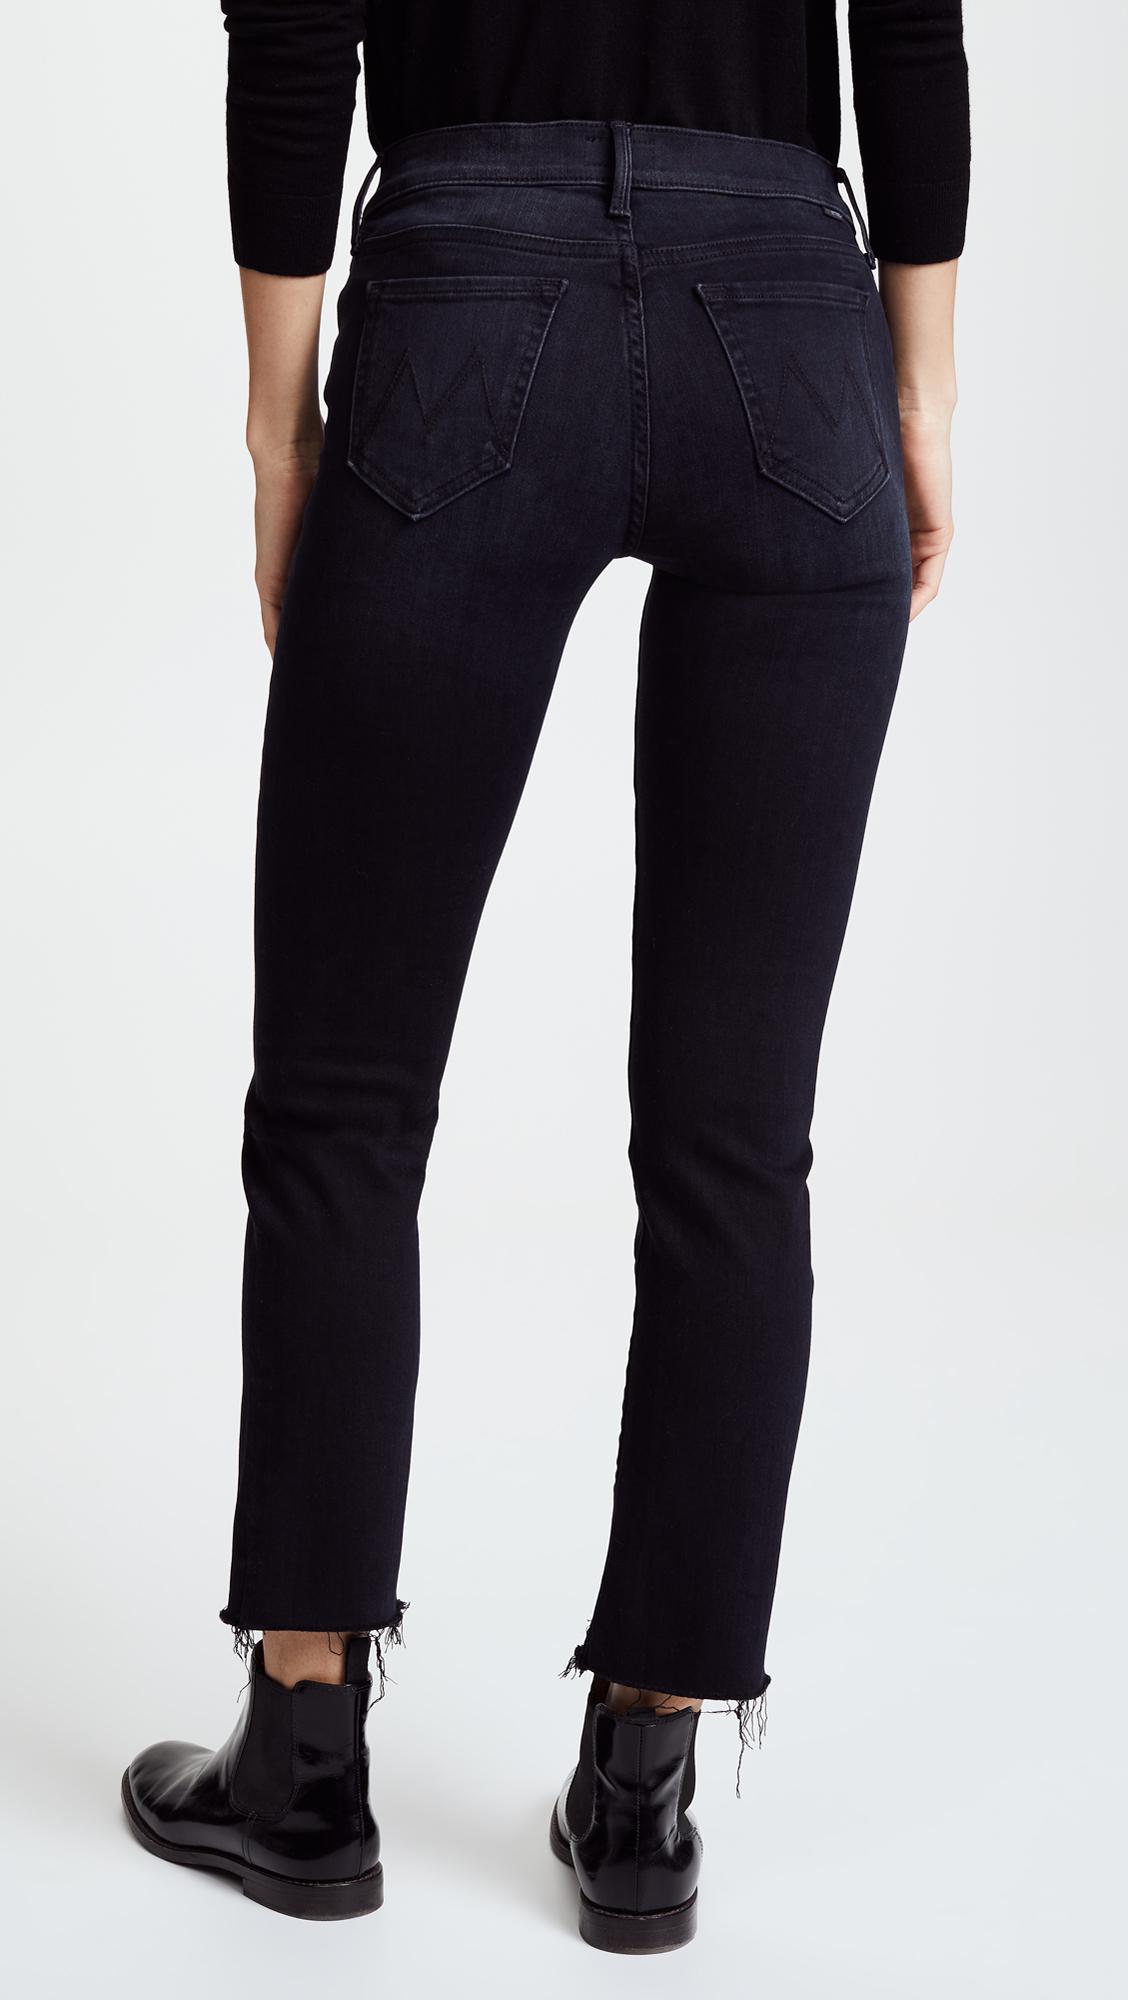 Mother Denim The Rascal Ankle Snippet Jeans in Black - Save 20% - Lyst